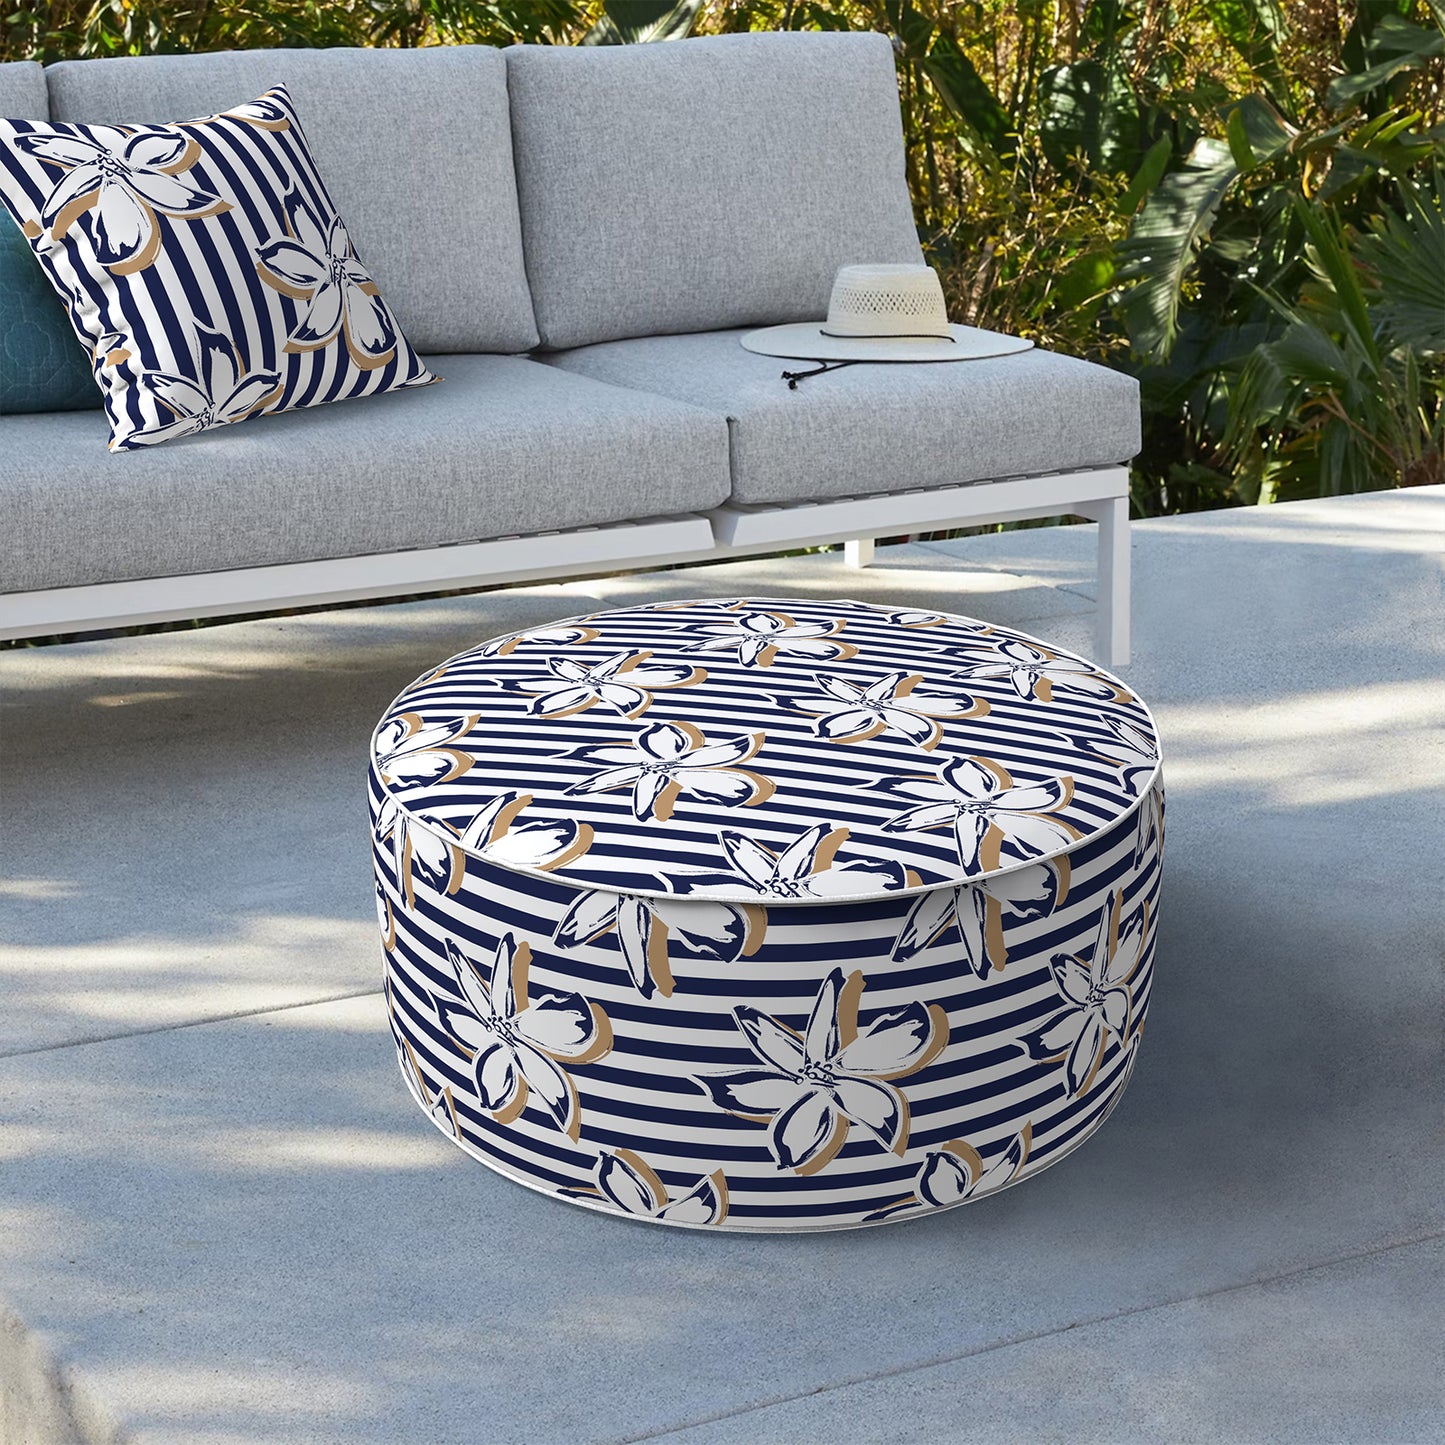 Outdoor Inflatable Stool Ottoman, All Weather Portable Footrest Stool, Furniture Stool Ottomans for Home Garden Beach, D31”xH14”, Clemens Cabana Navy